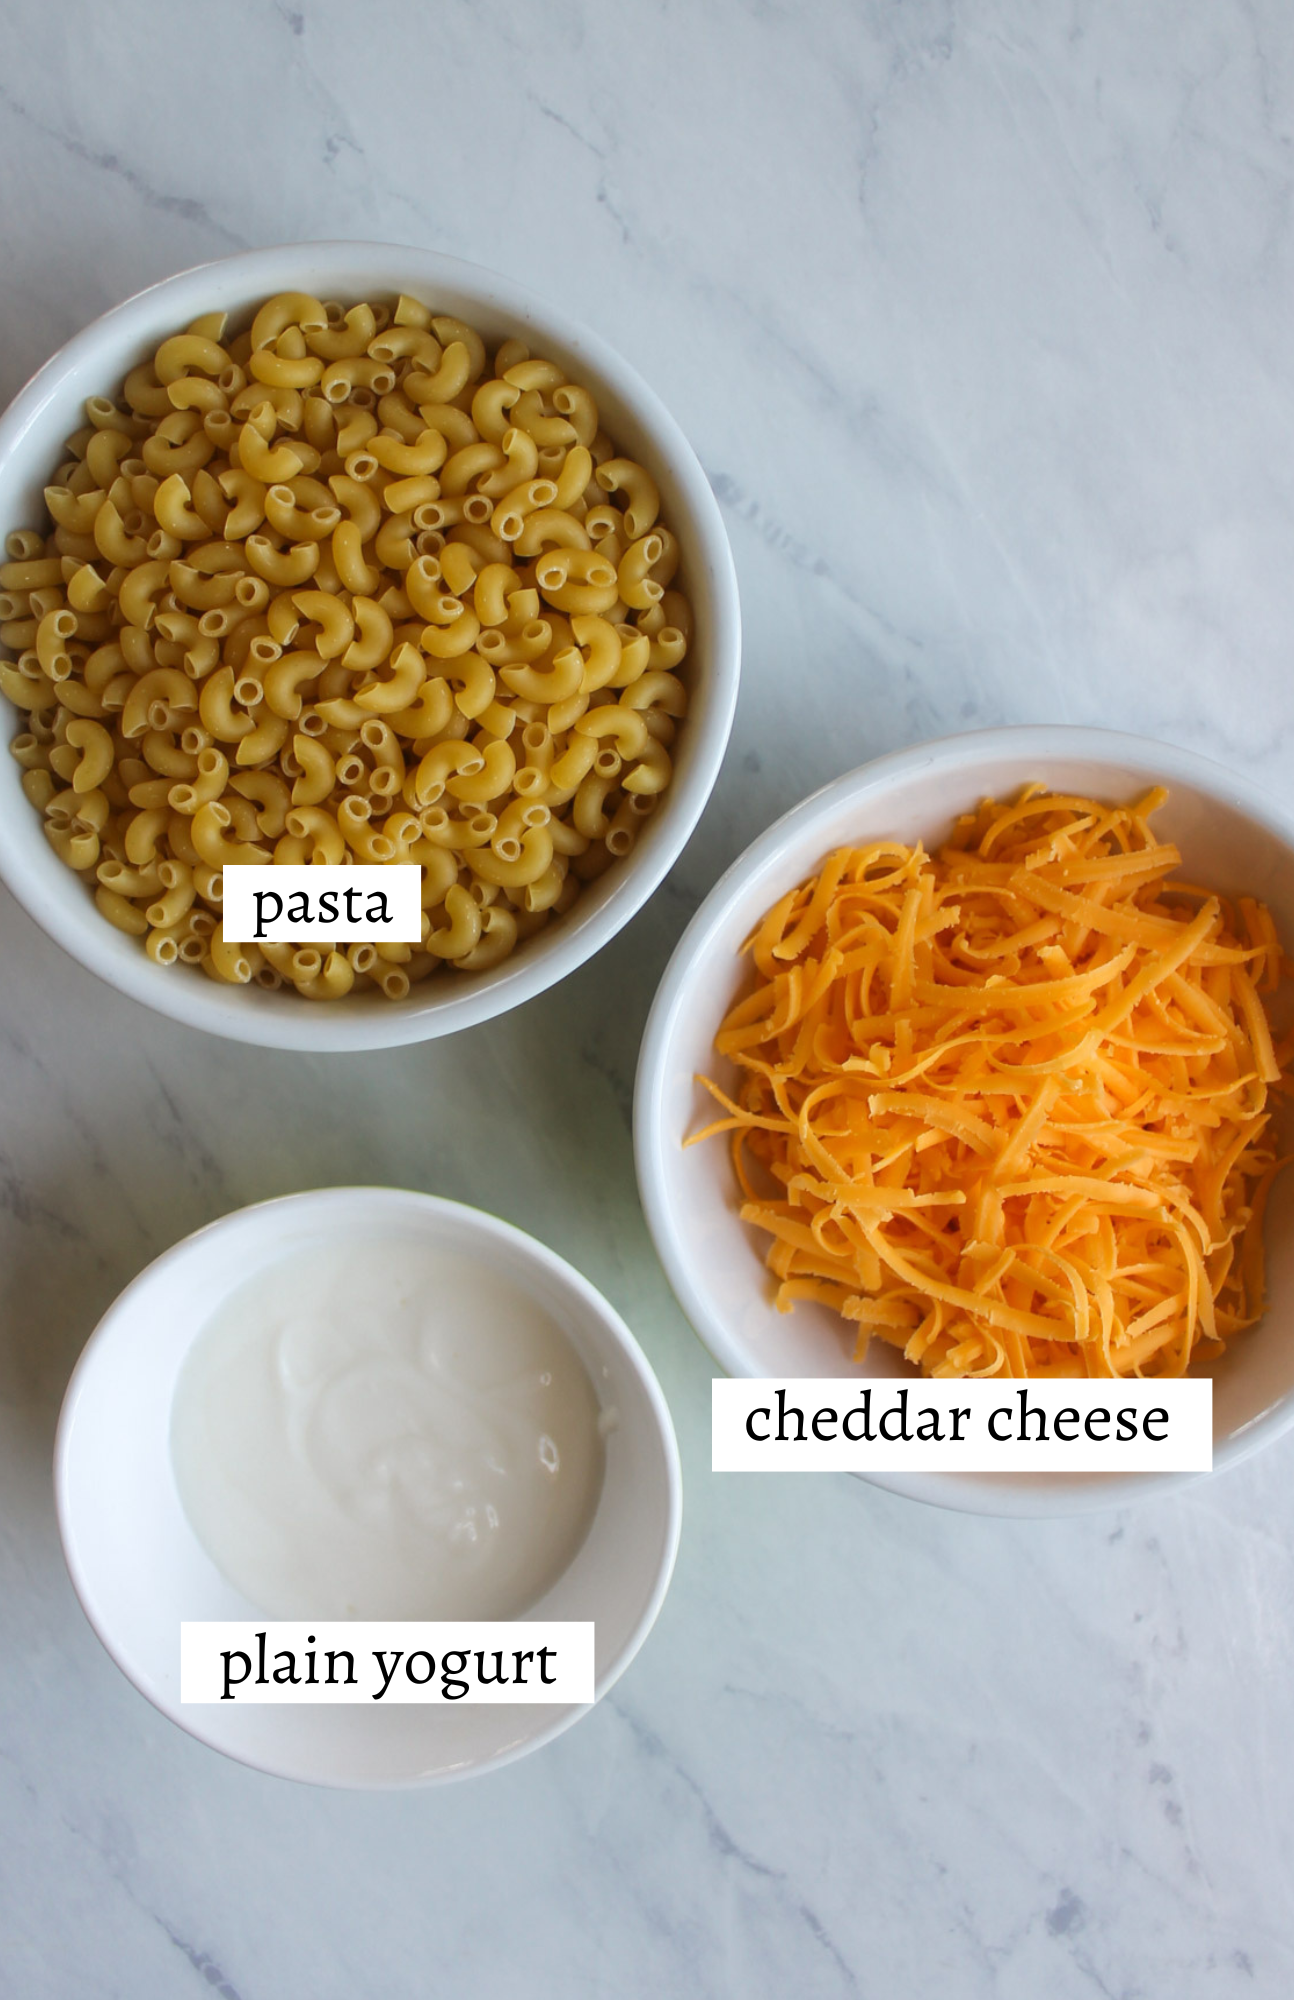 Labeled ingredients for mac and cheese for kids.